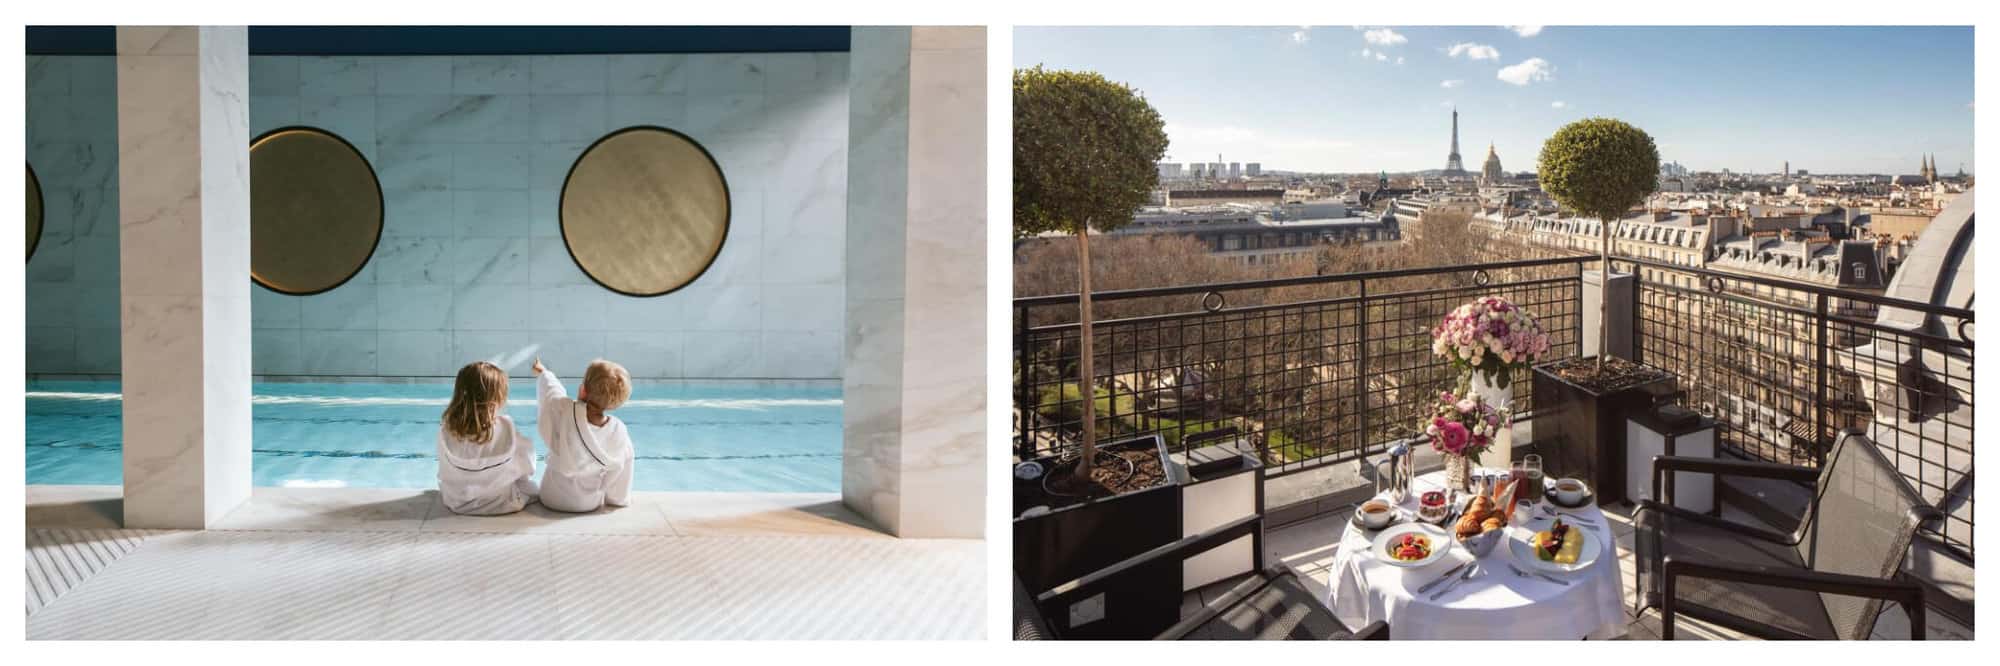 Left- 2 young children sit poolside. 
Right- A terrace is shown with a breakfast. It shown views of the Eiffel Tower. 